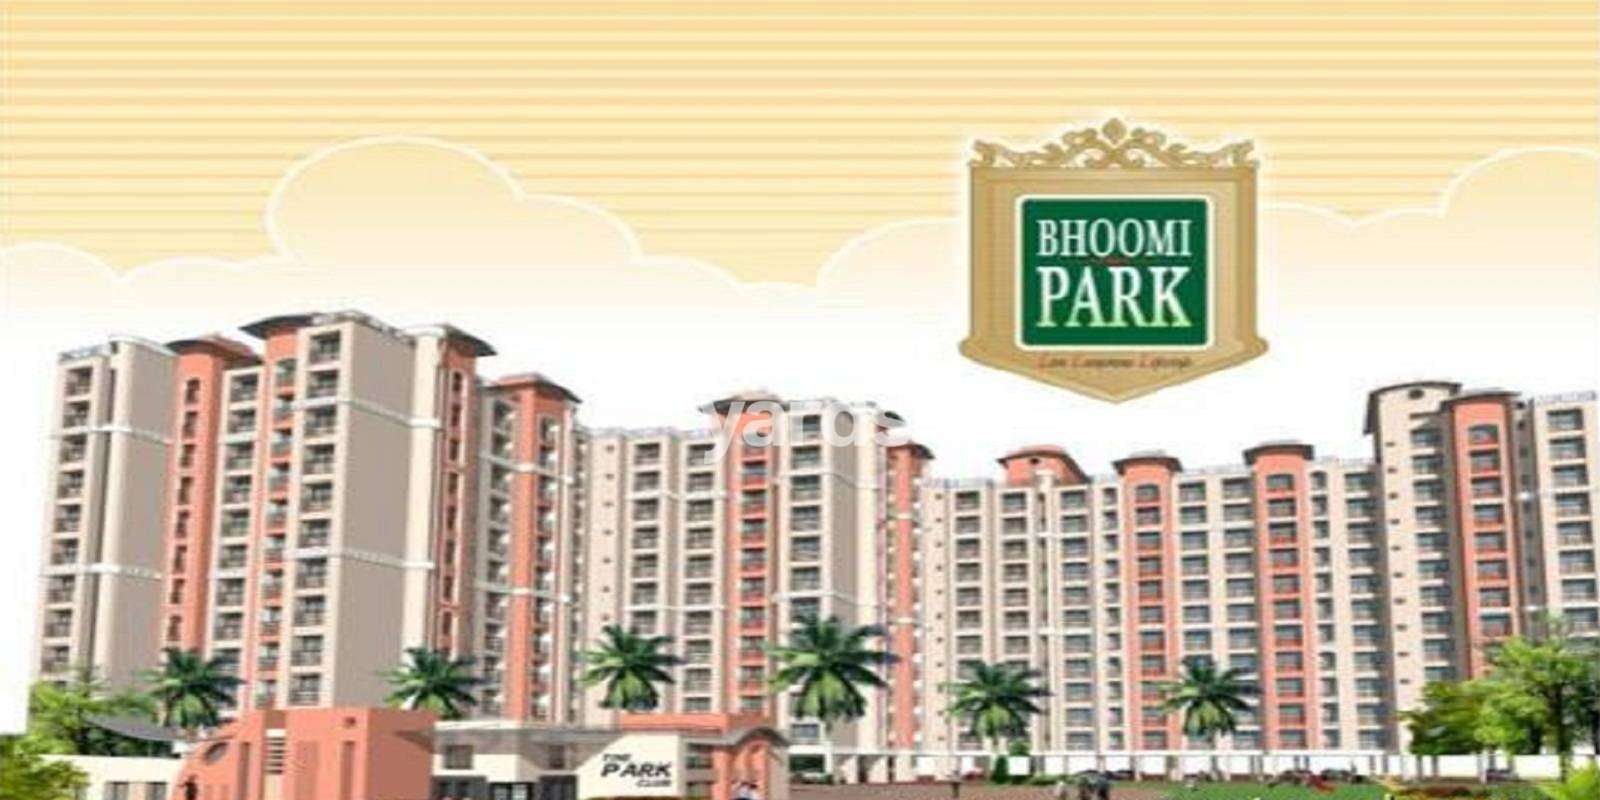 Bhoomi Park Cover Image